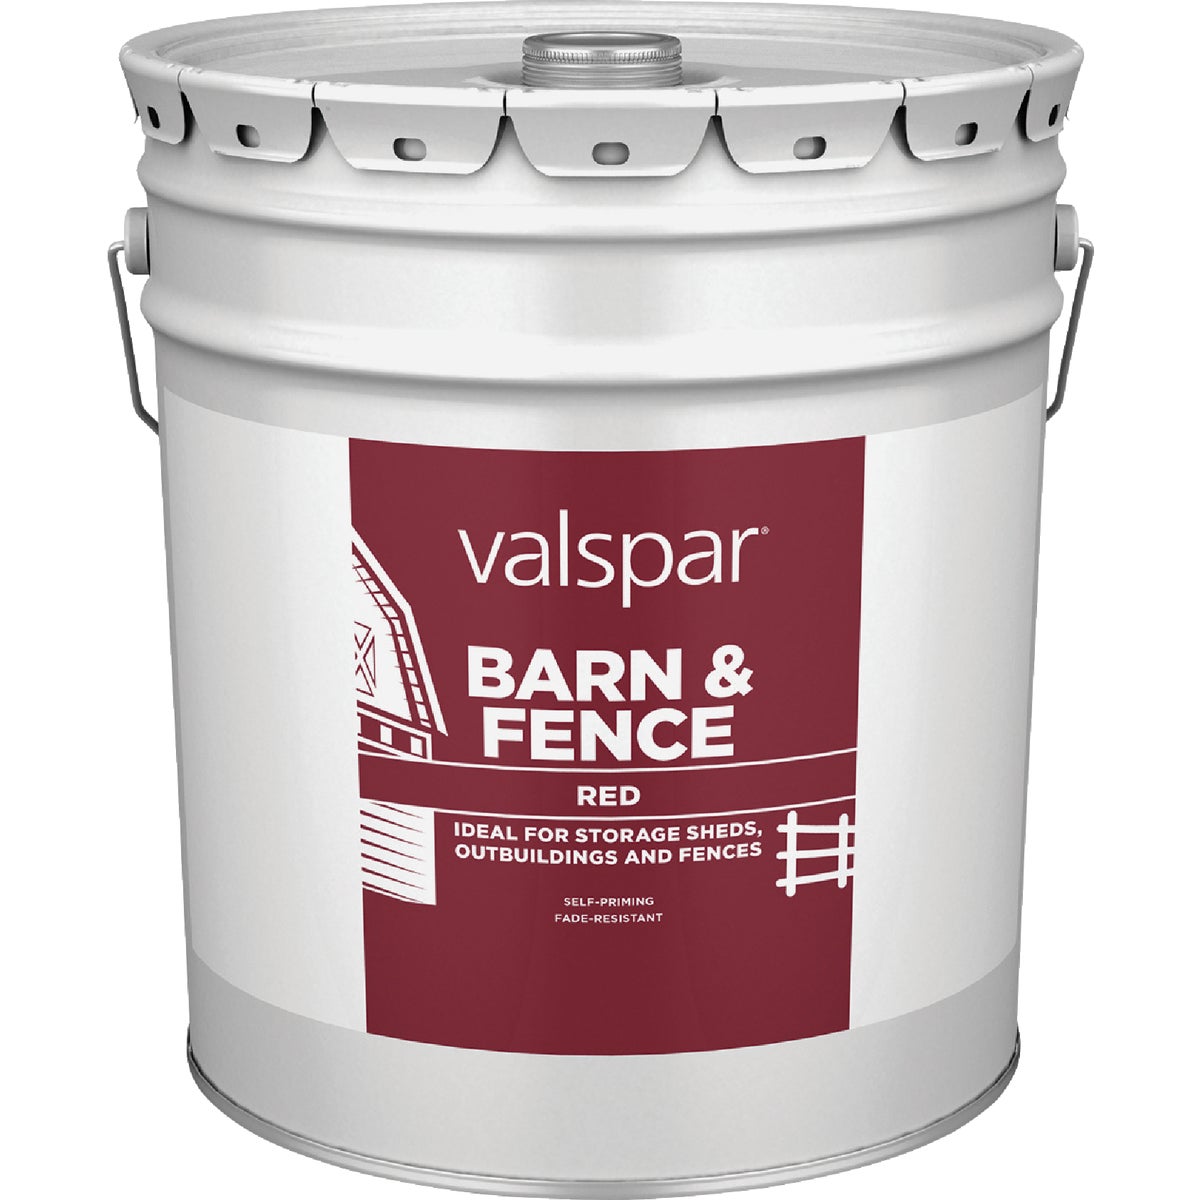 Valspar Oil Paint & Primer In One Low Sheen Barn & Fence Paint, Red, 5 Gal.